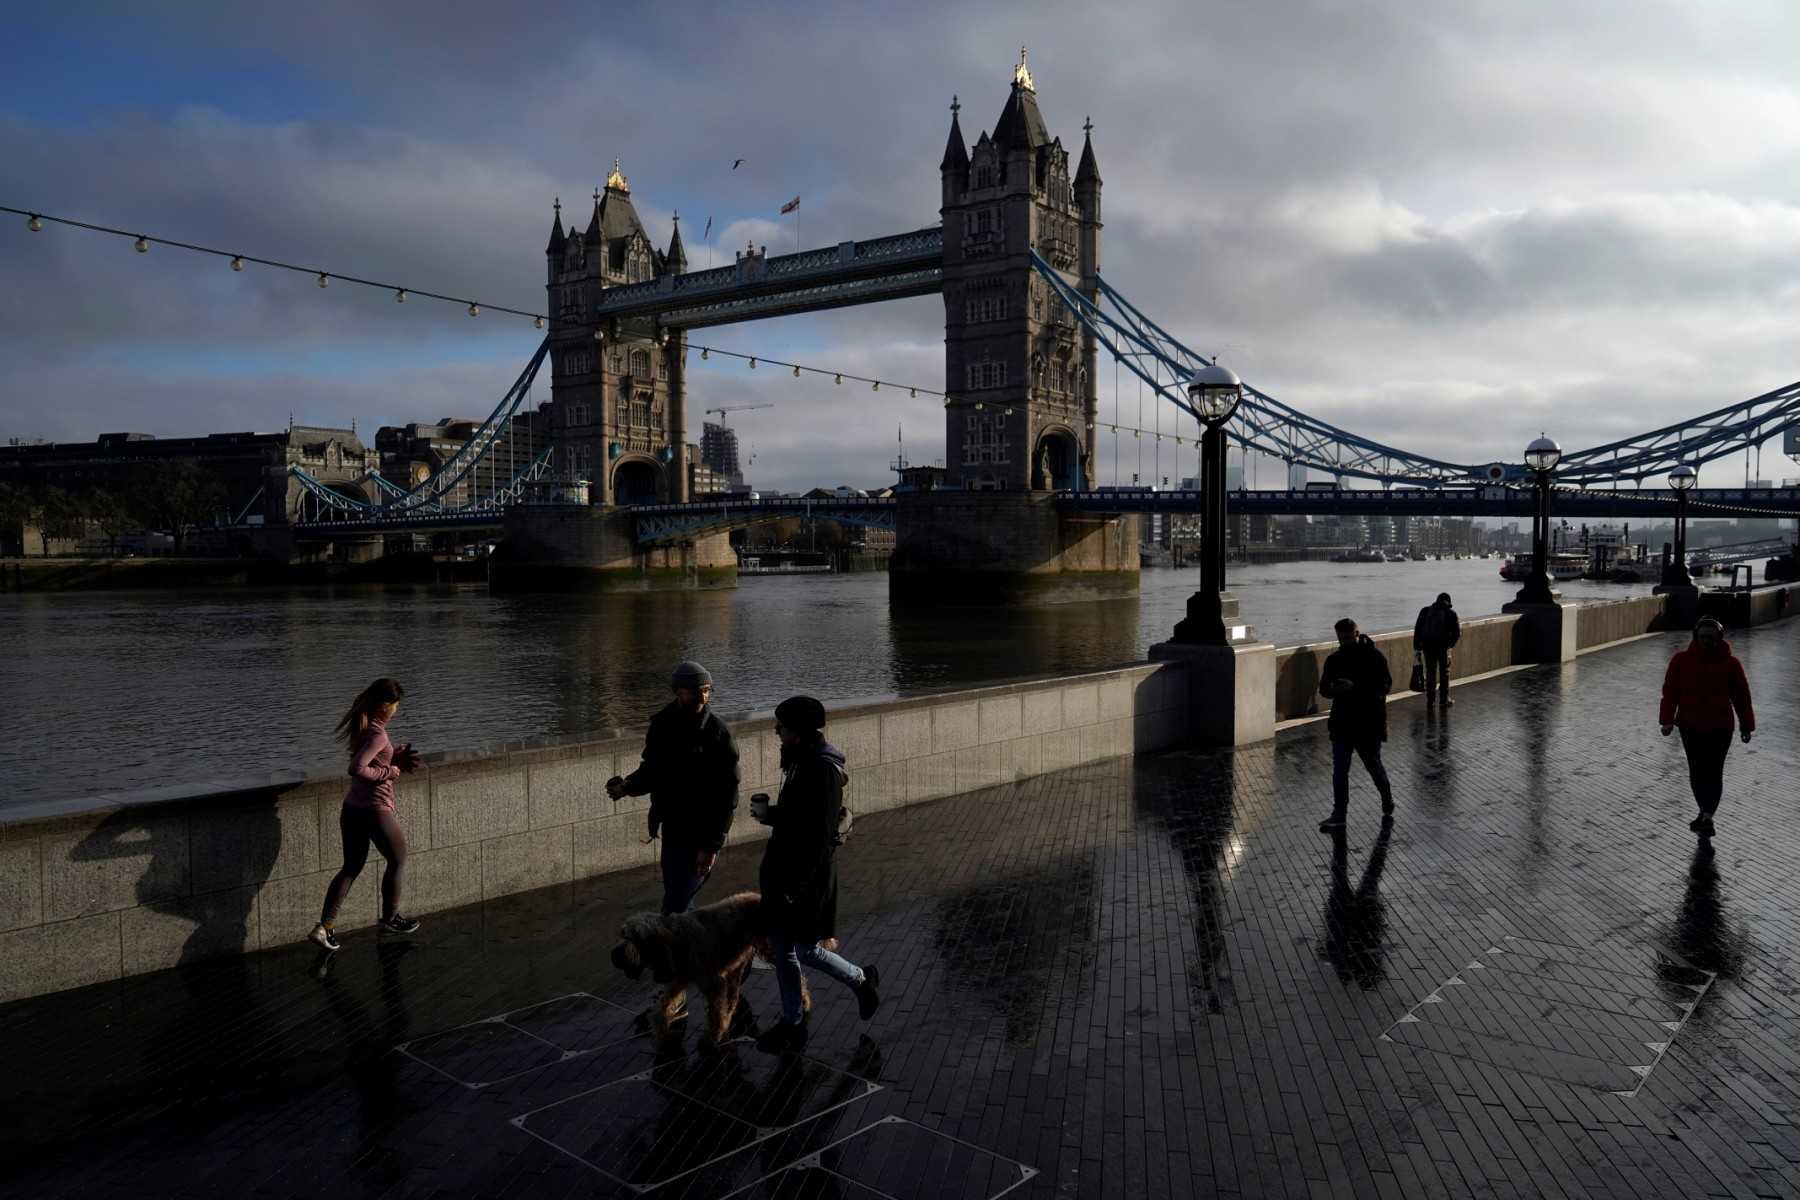 People take their daily exercise along the Thames river embankment near the Tower Bridge in central London on Feb 4, 2021, during the third national lockdown. British Airways have been among the worst affected by sector-wide turmoil, as carriers race to meet soaring demand after the lifting of Covid travel restrictions. Photo: AFP